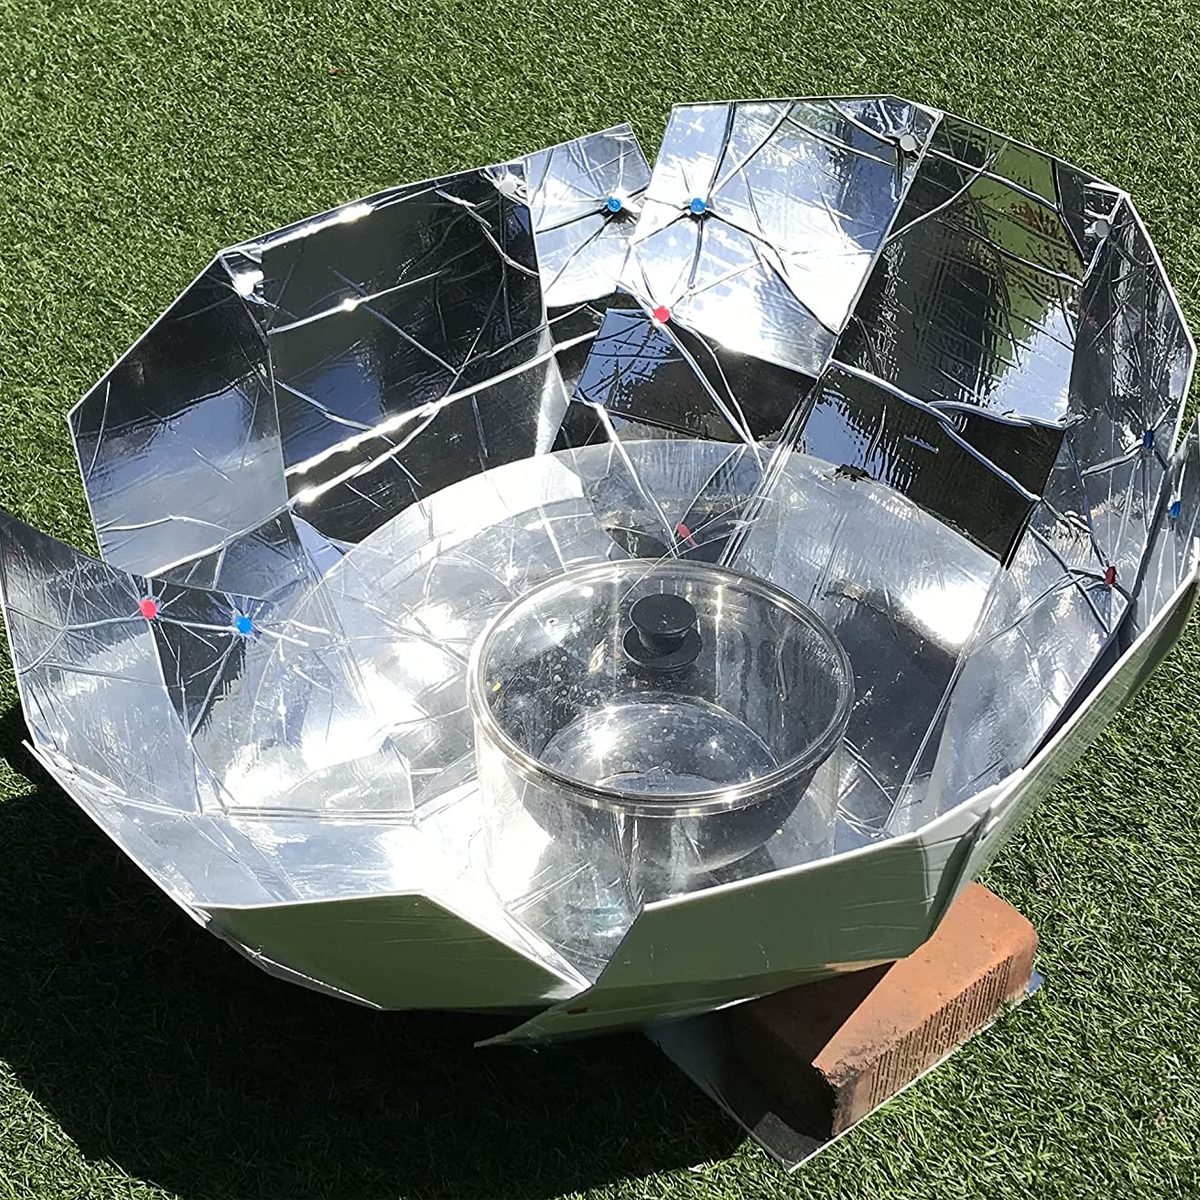 Solar Ovens: Cooking with the Sun in an Emergency (and Every Day